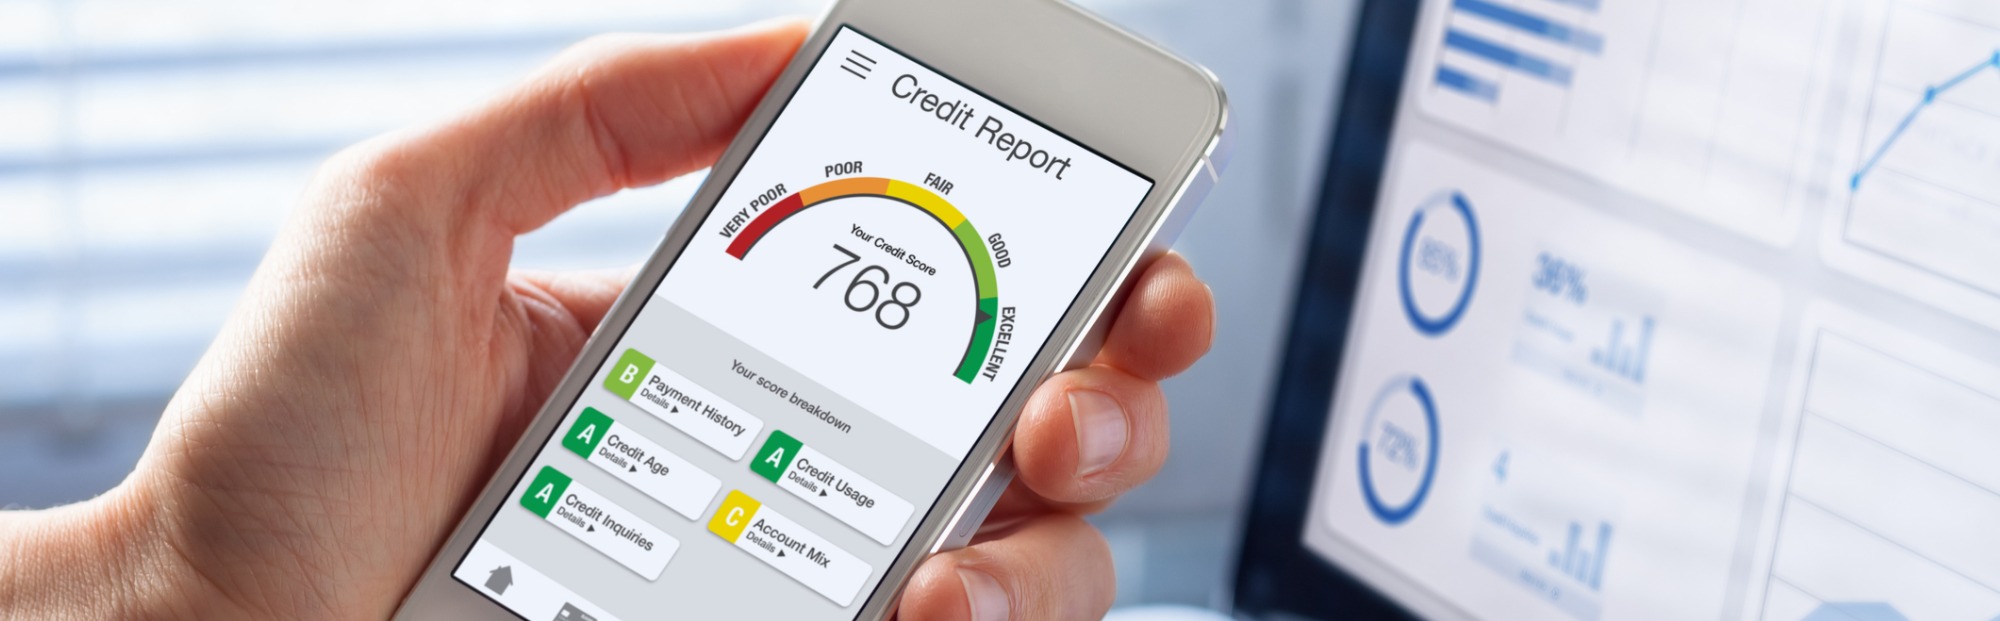 Checking credit report on smartphone app.